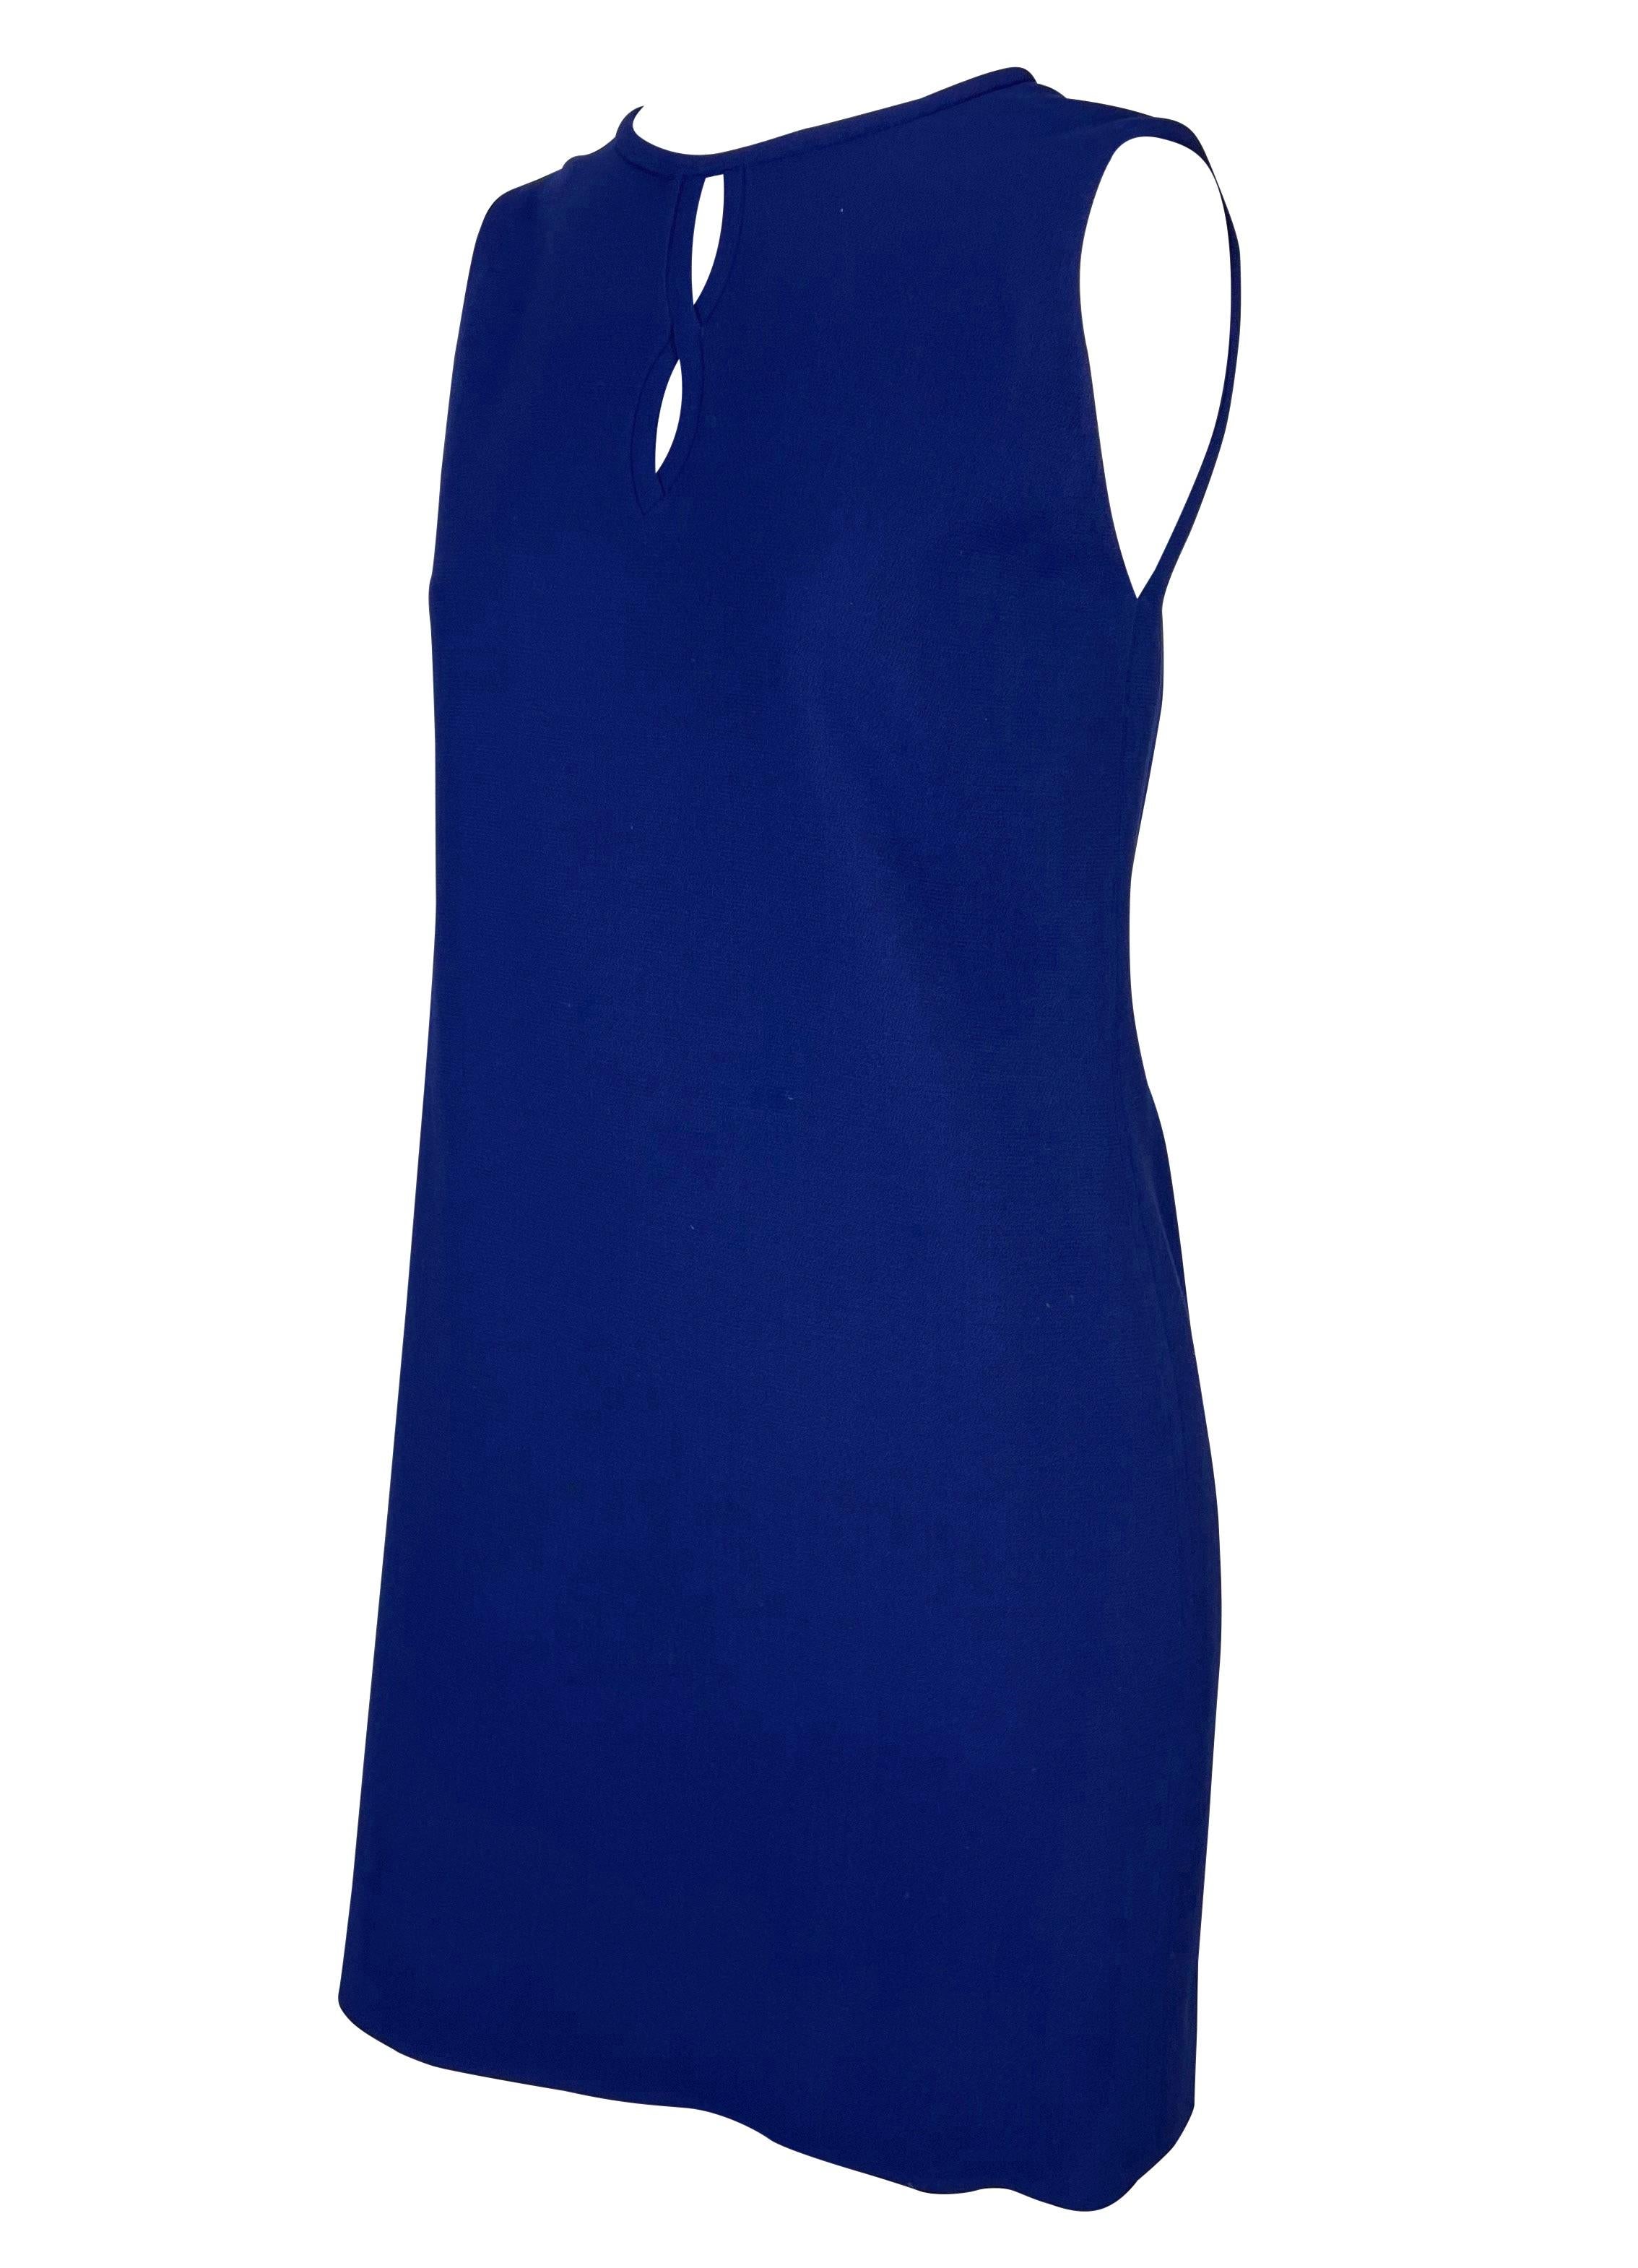 Presenting a fabulous royal blue Gianni Versace Couture dress designed by Gianni Versace. From the Fall/Winter 1997 collection, this beautiful sleeveless wool stretch dress is made complete with a keyhole cutout at the bust. Add this gorgeous